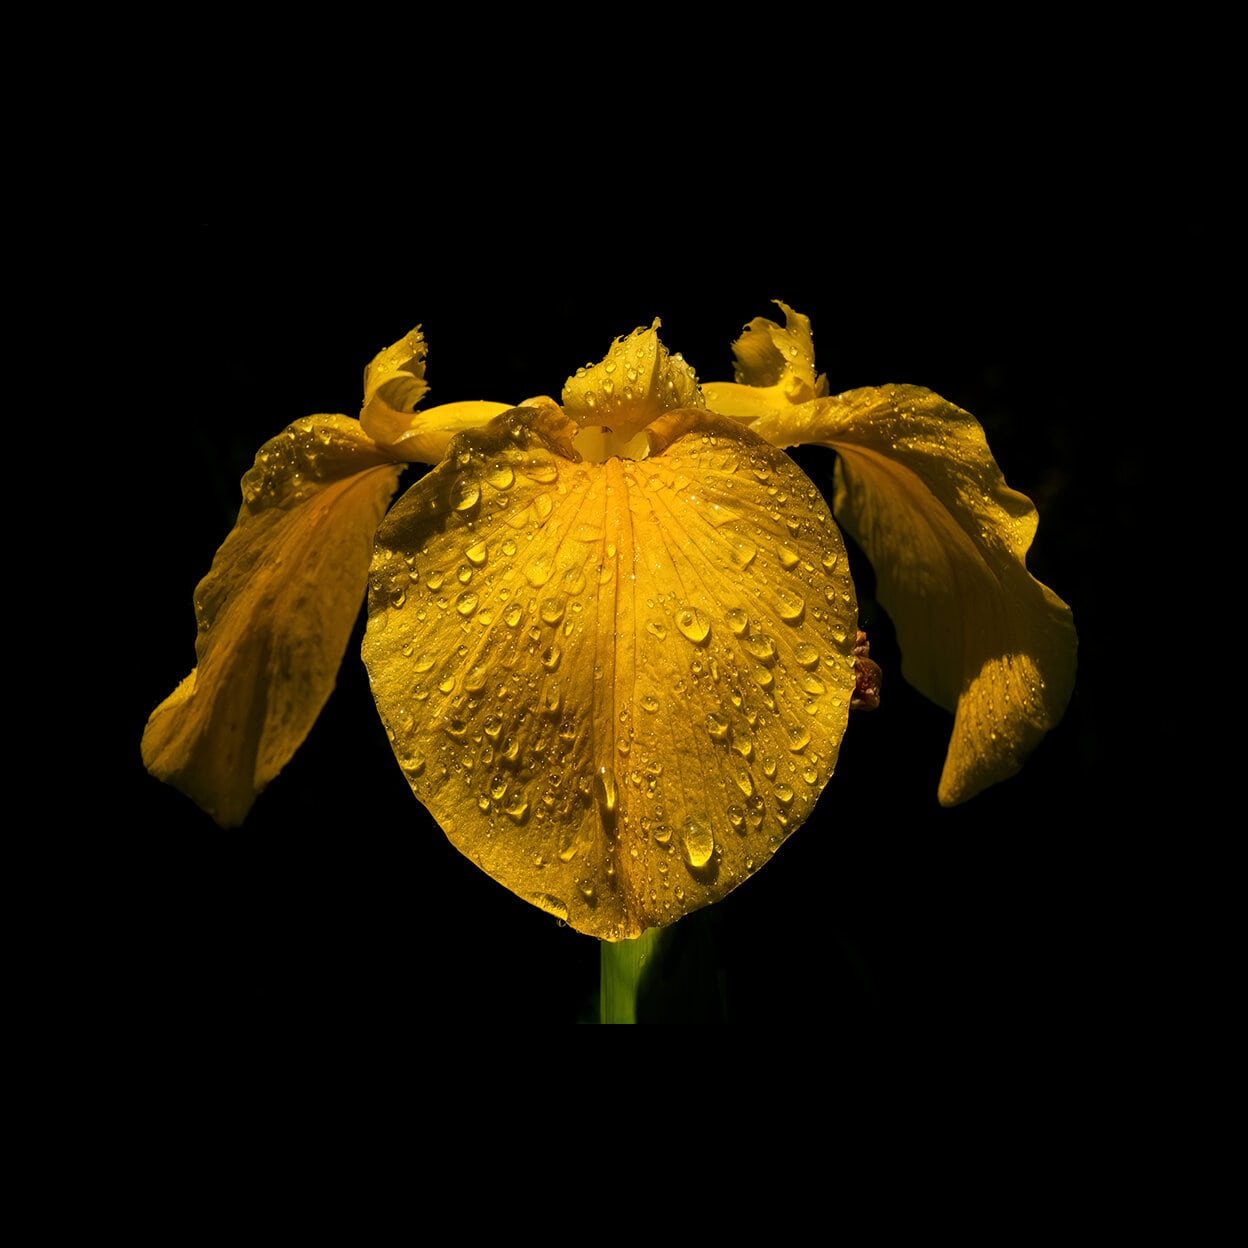 Shapely golden yellow petals with raindrops on it.